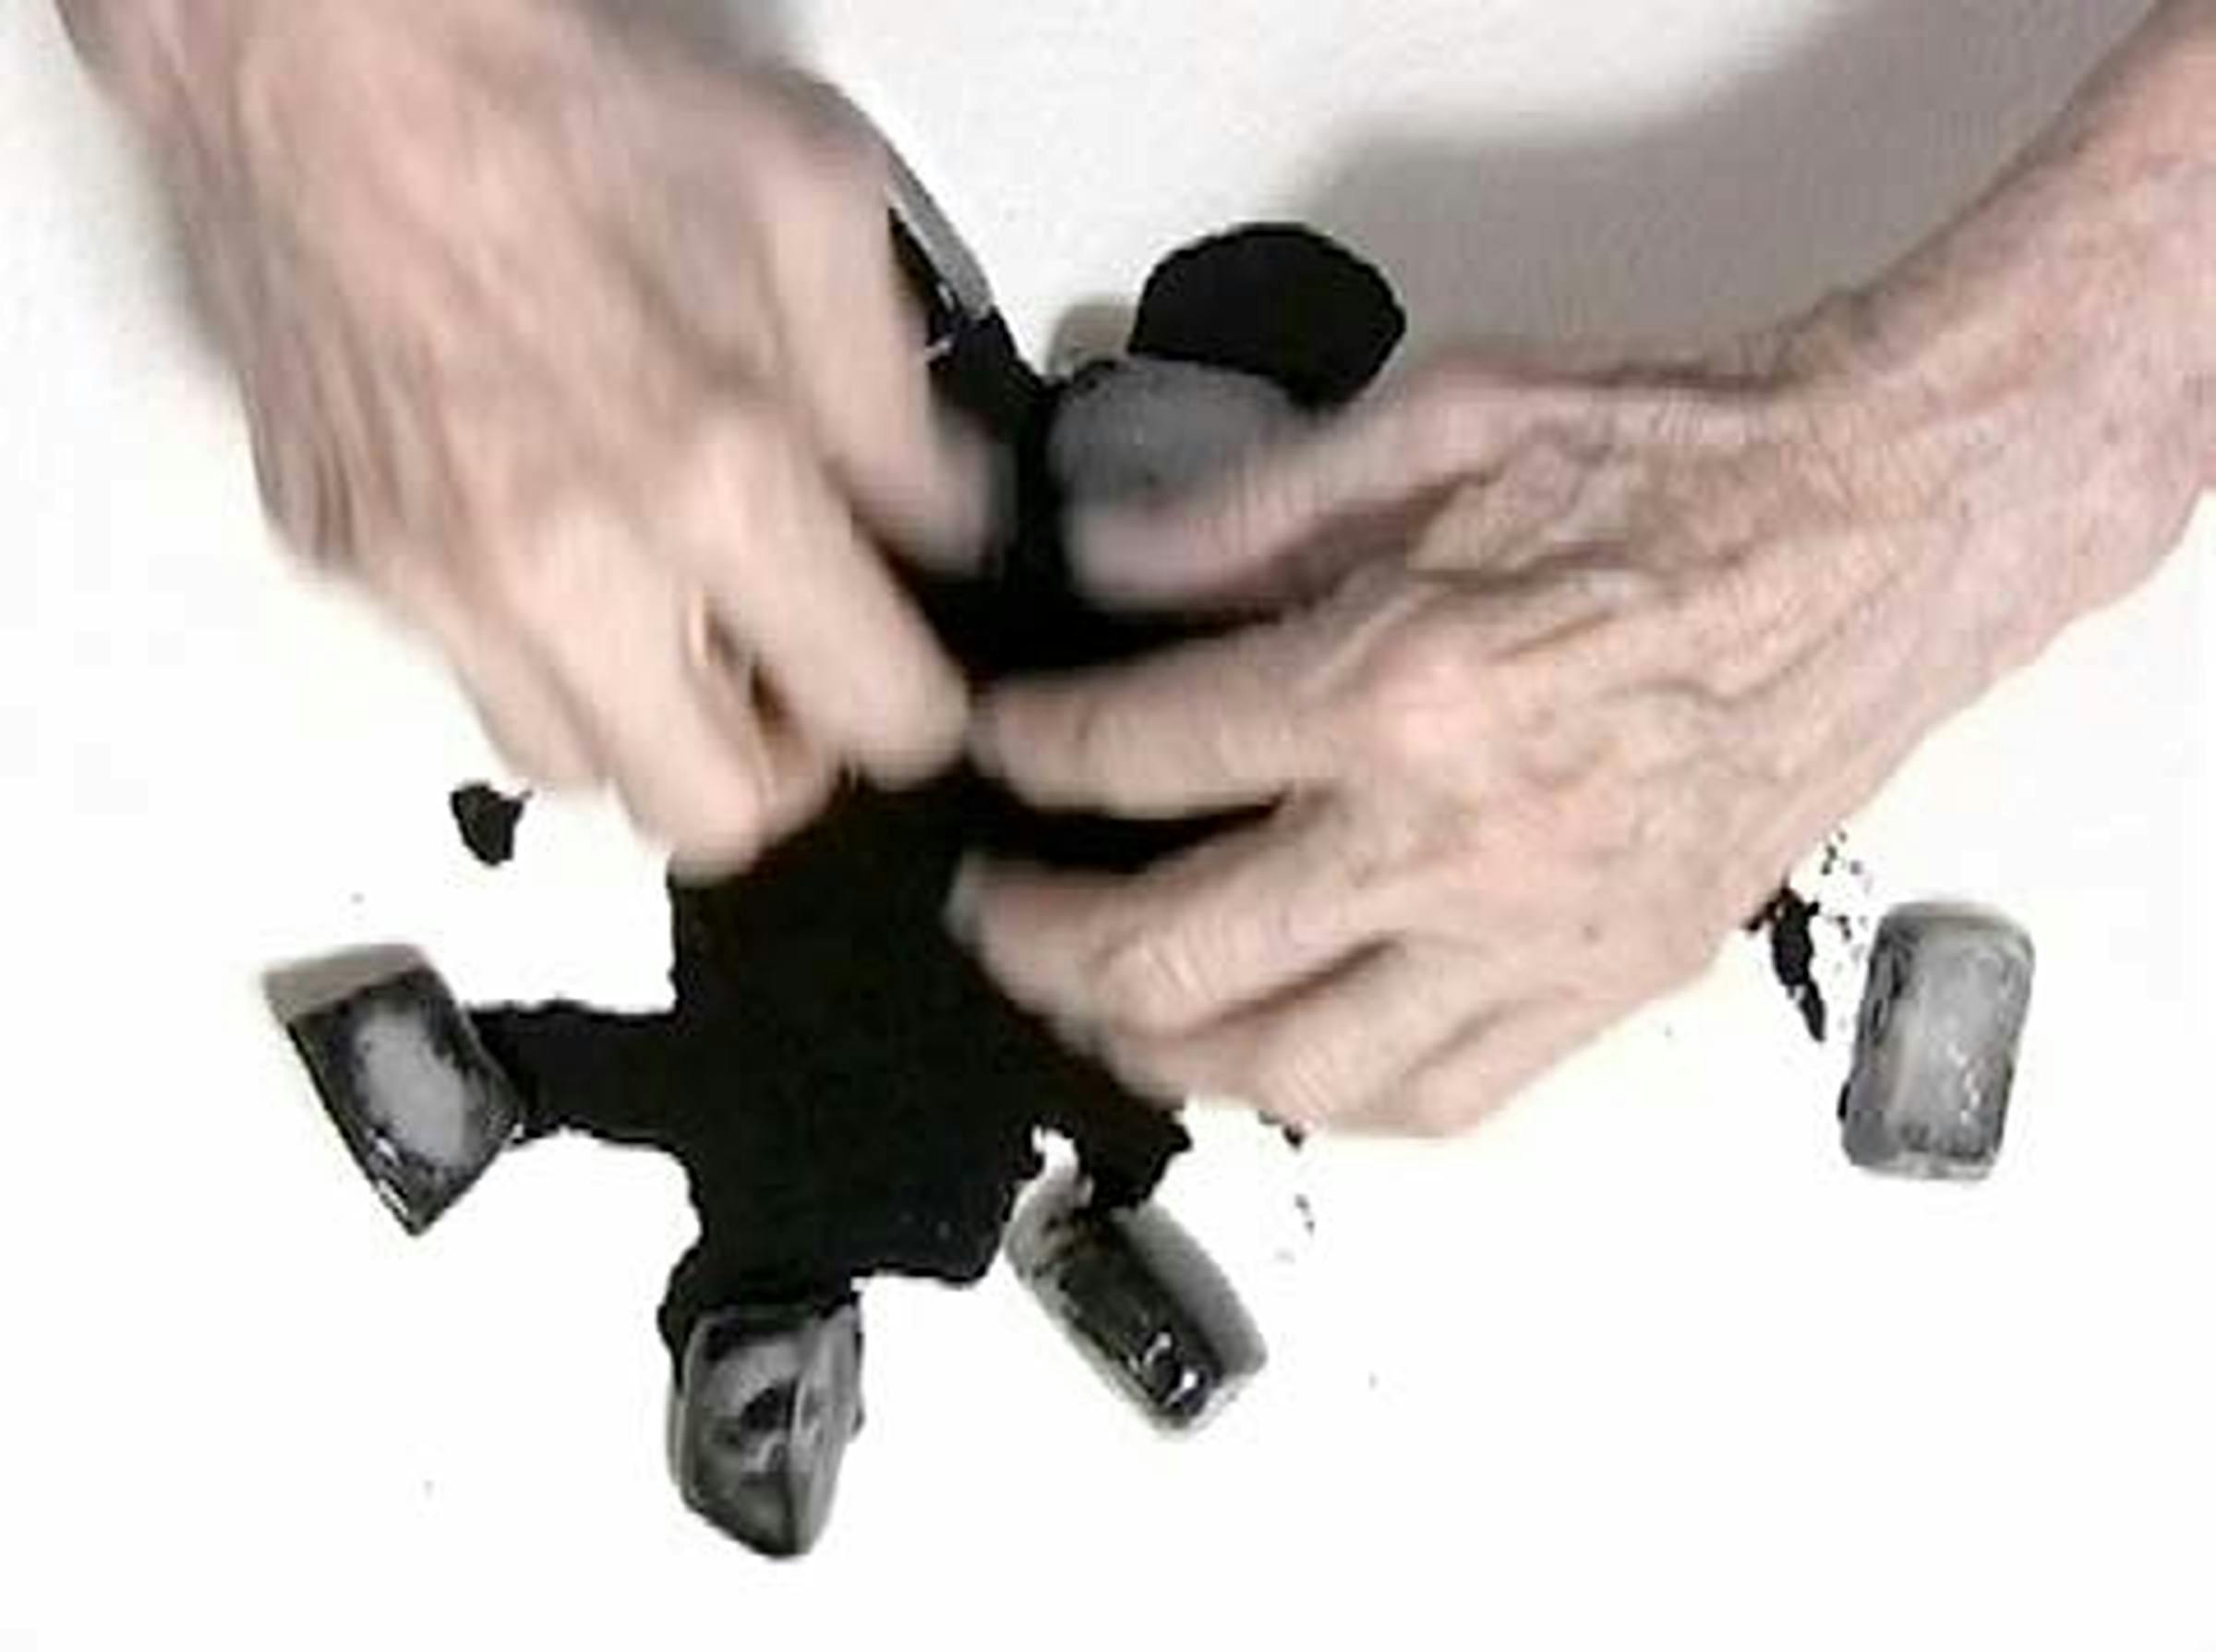 The artist's hand hold ice cubes and move around black ink on a white surface